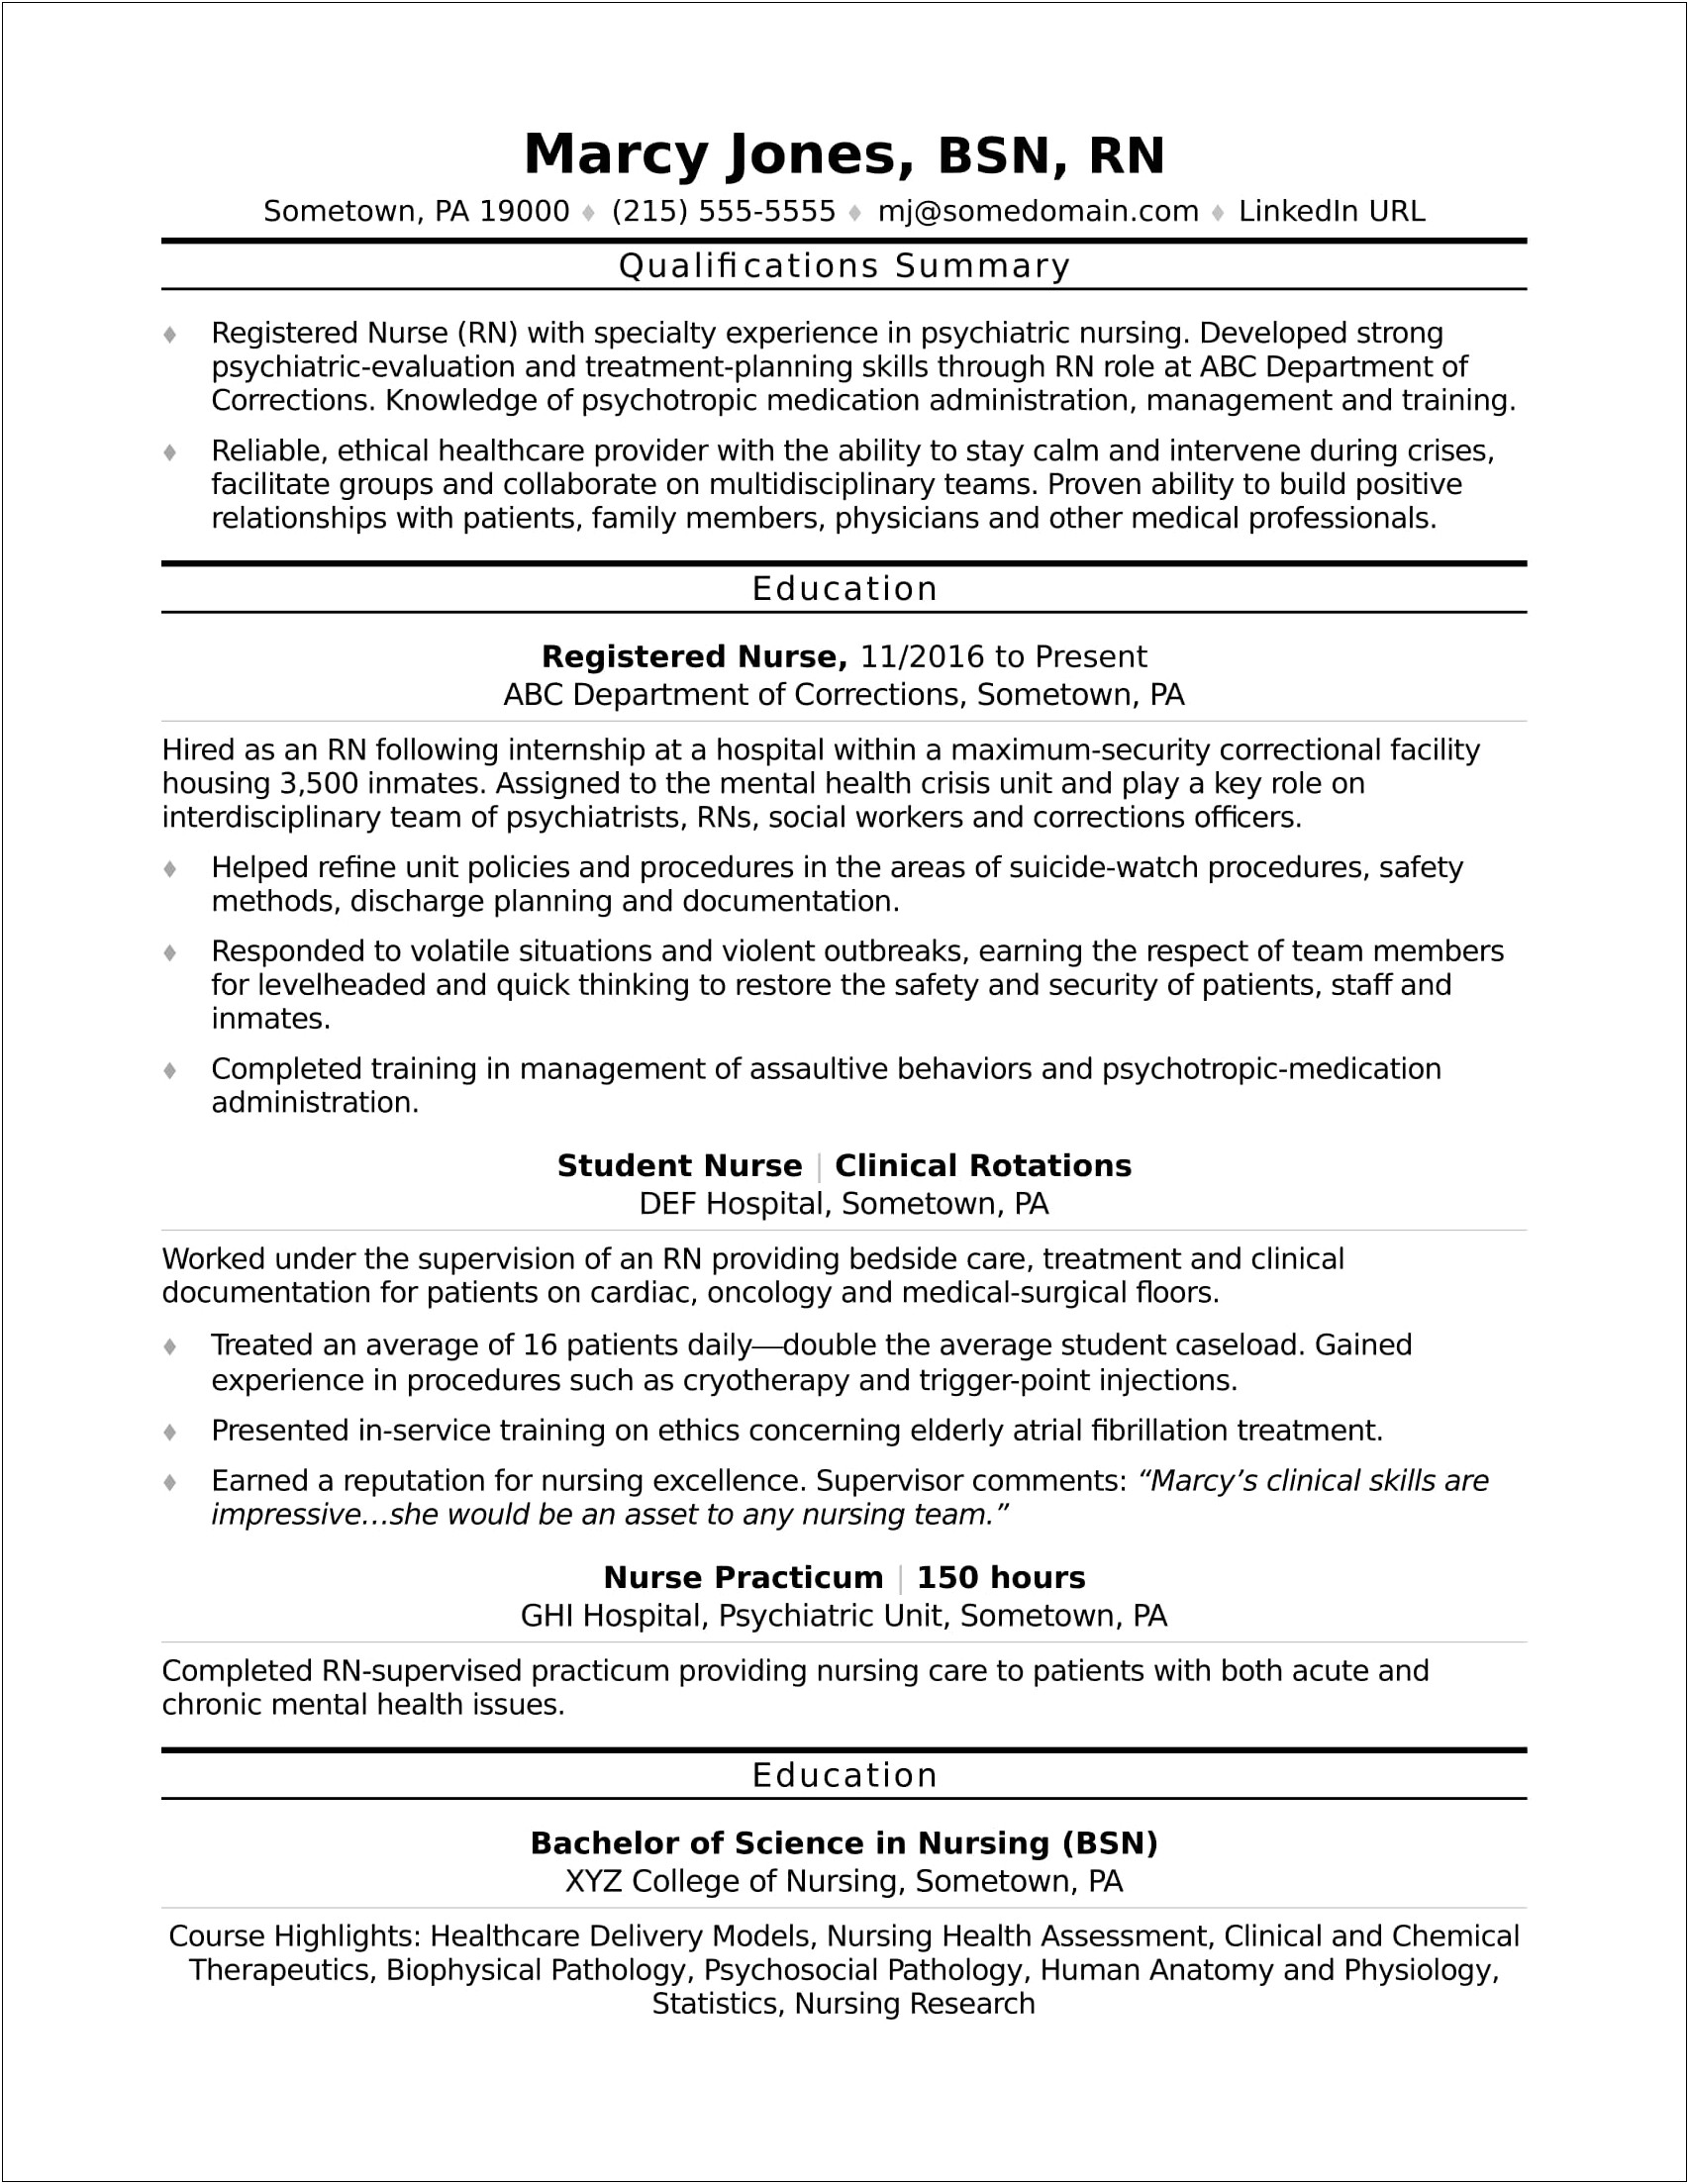 Resume Examples With Linkedin Url